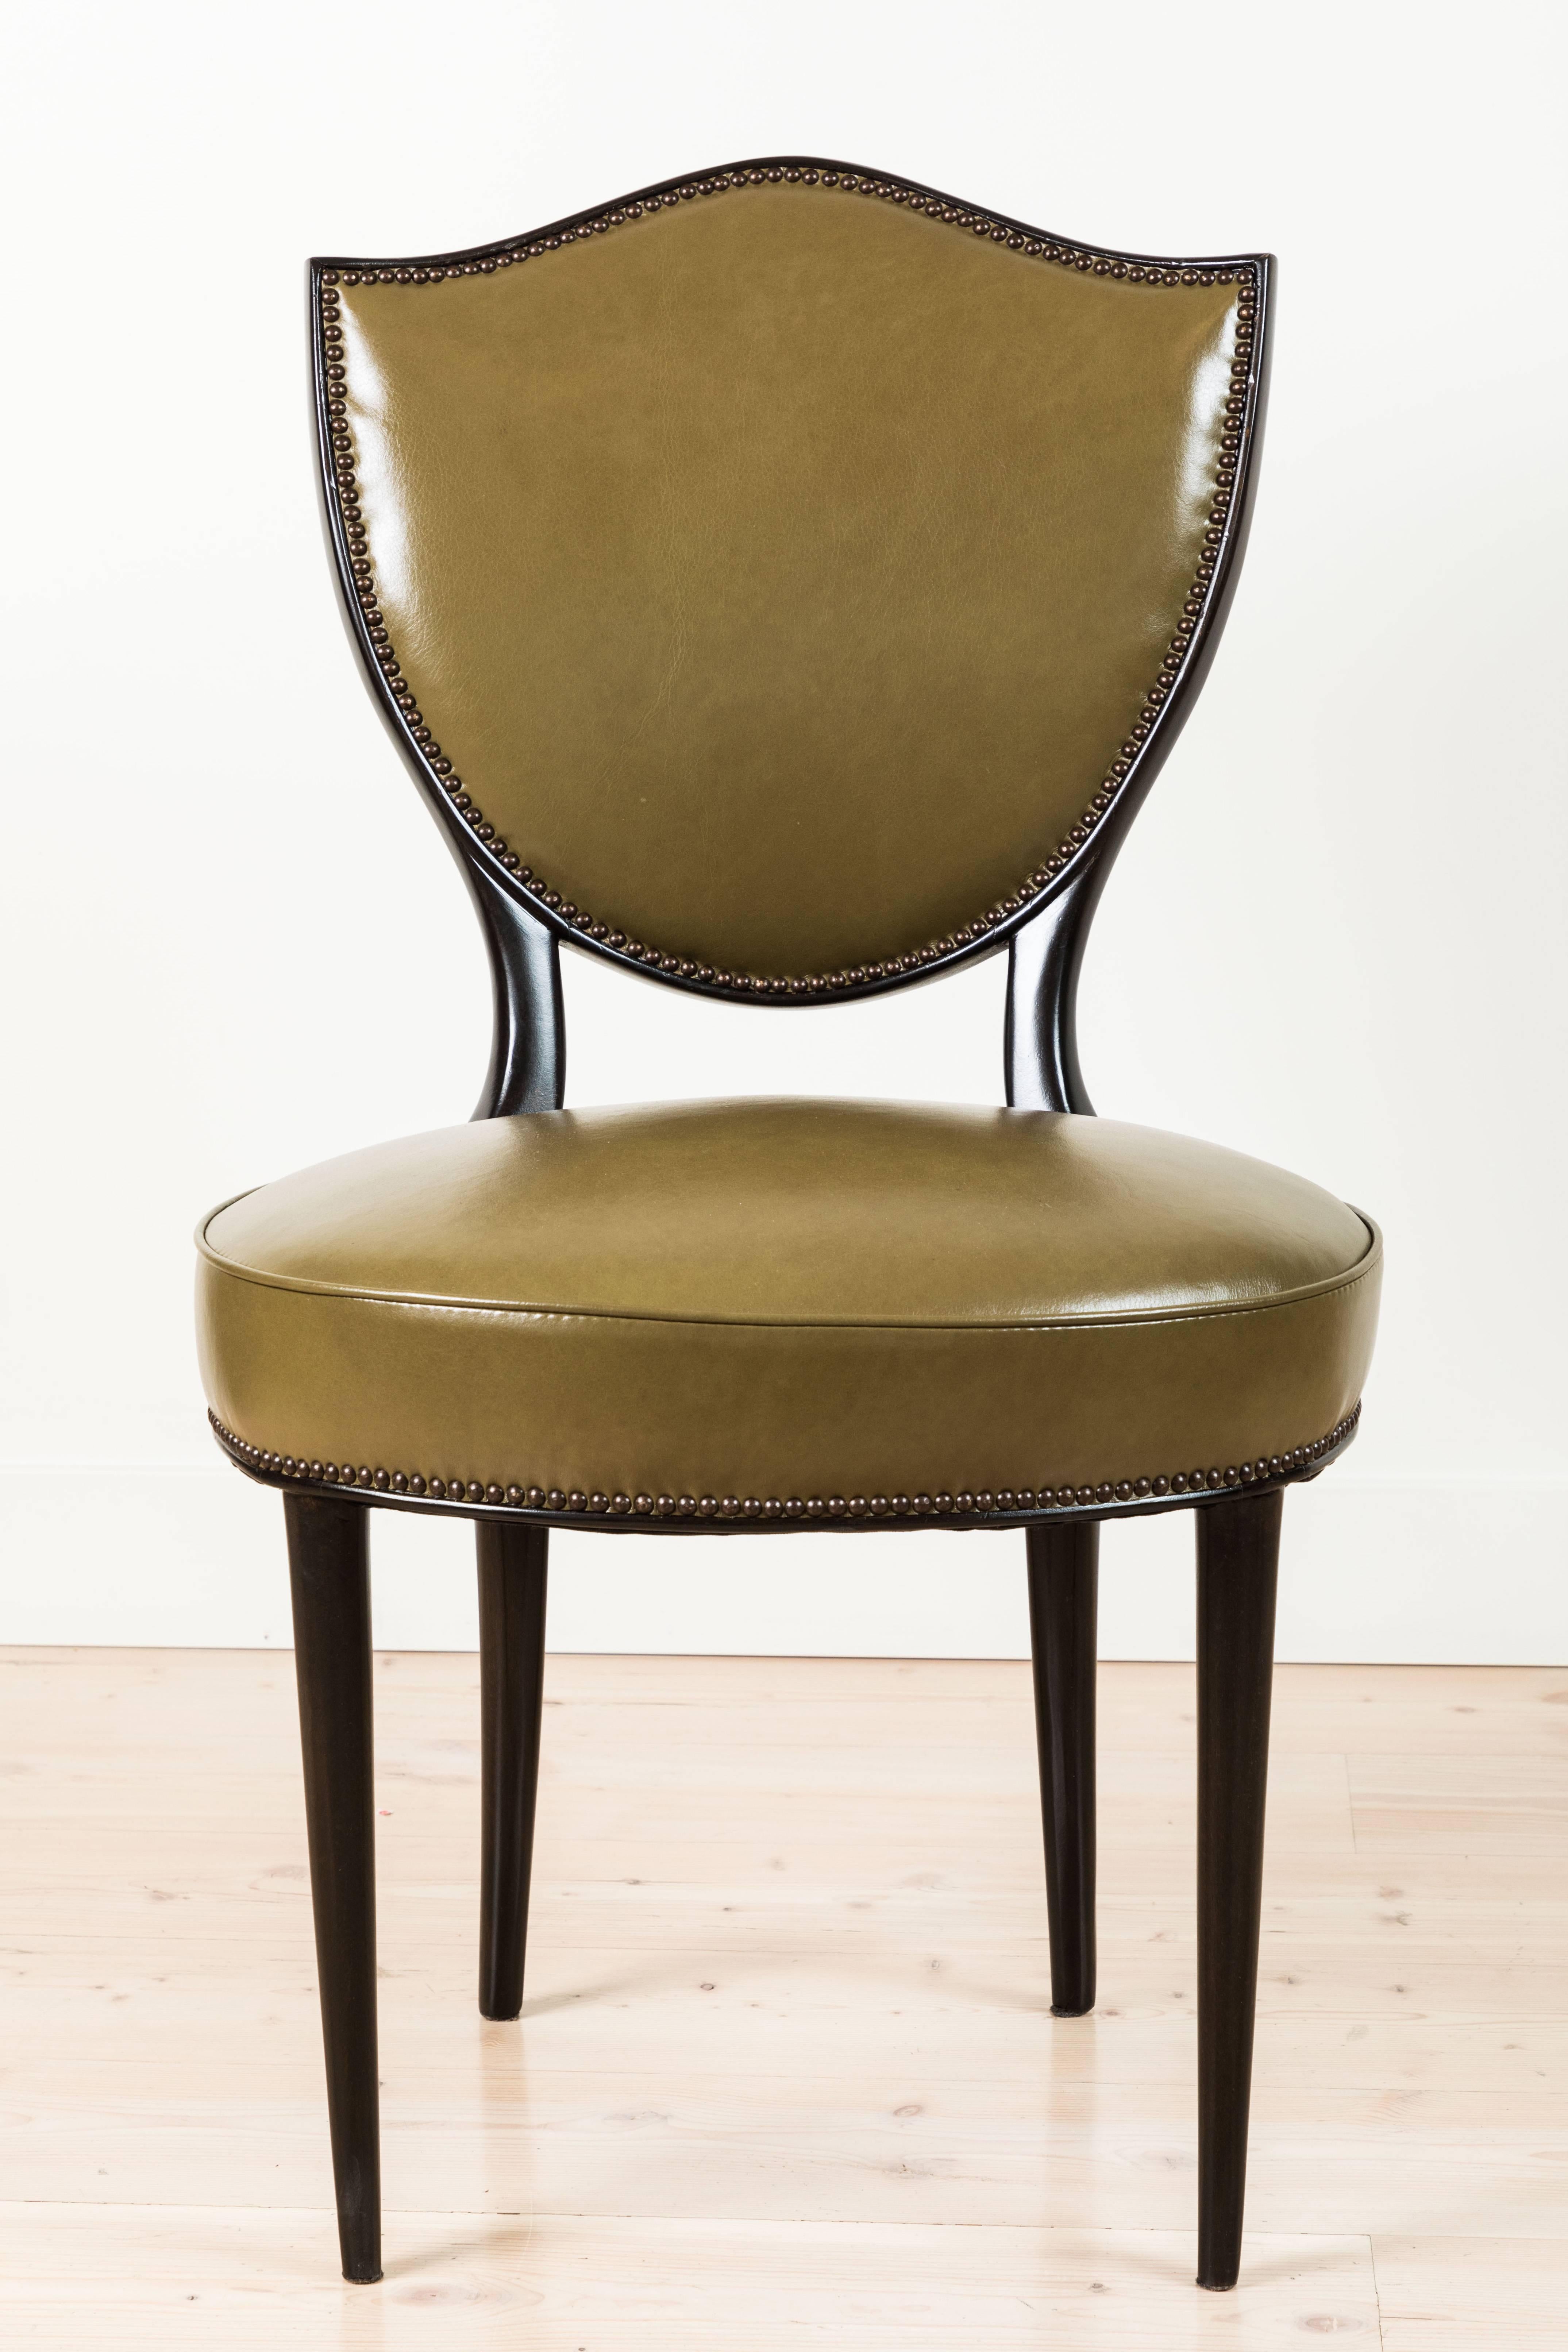 Mid-20th Century Pair of Shield Back Sitting Chairs by Grosfeld House